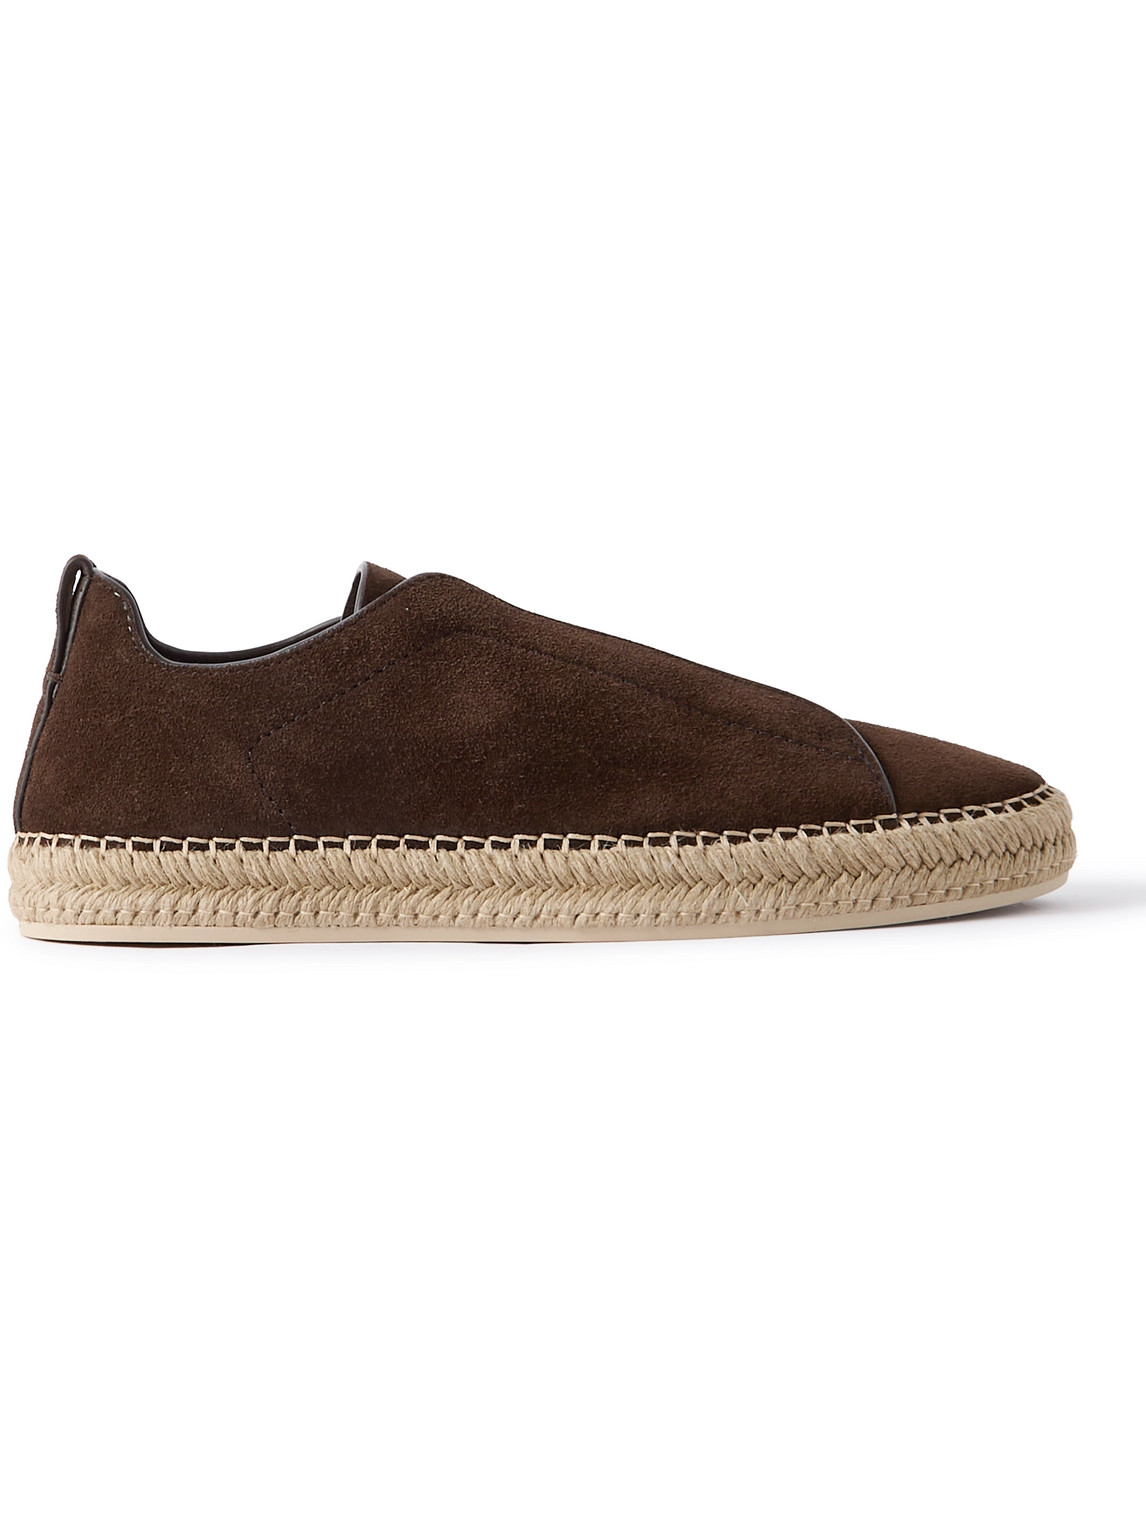 Zegna Triple Stitch™ Leather-trimmed Suede Slip-on Sneakers In Brown